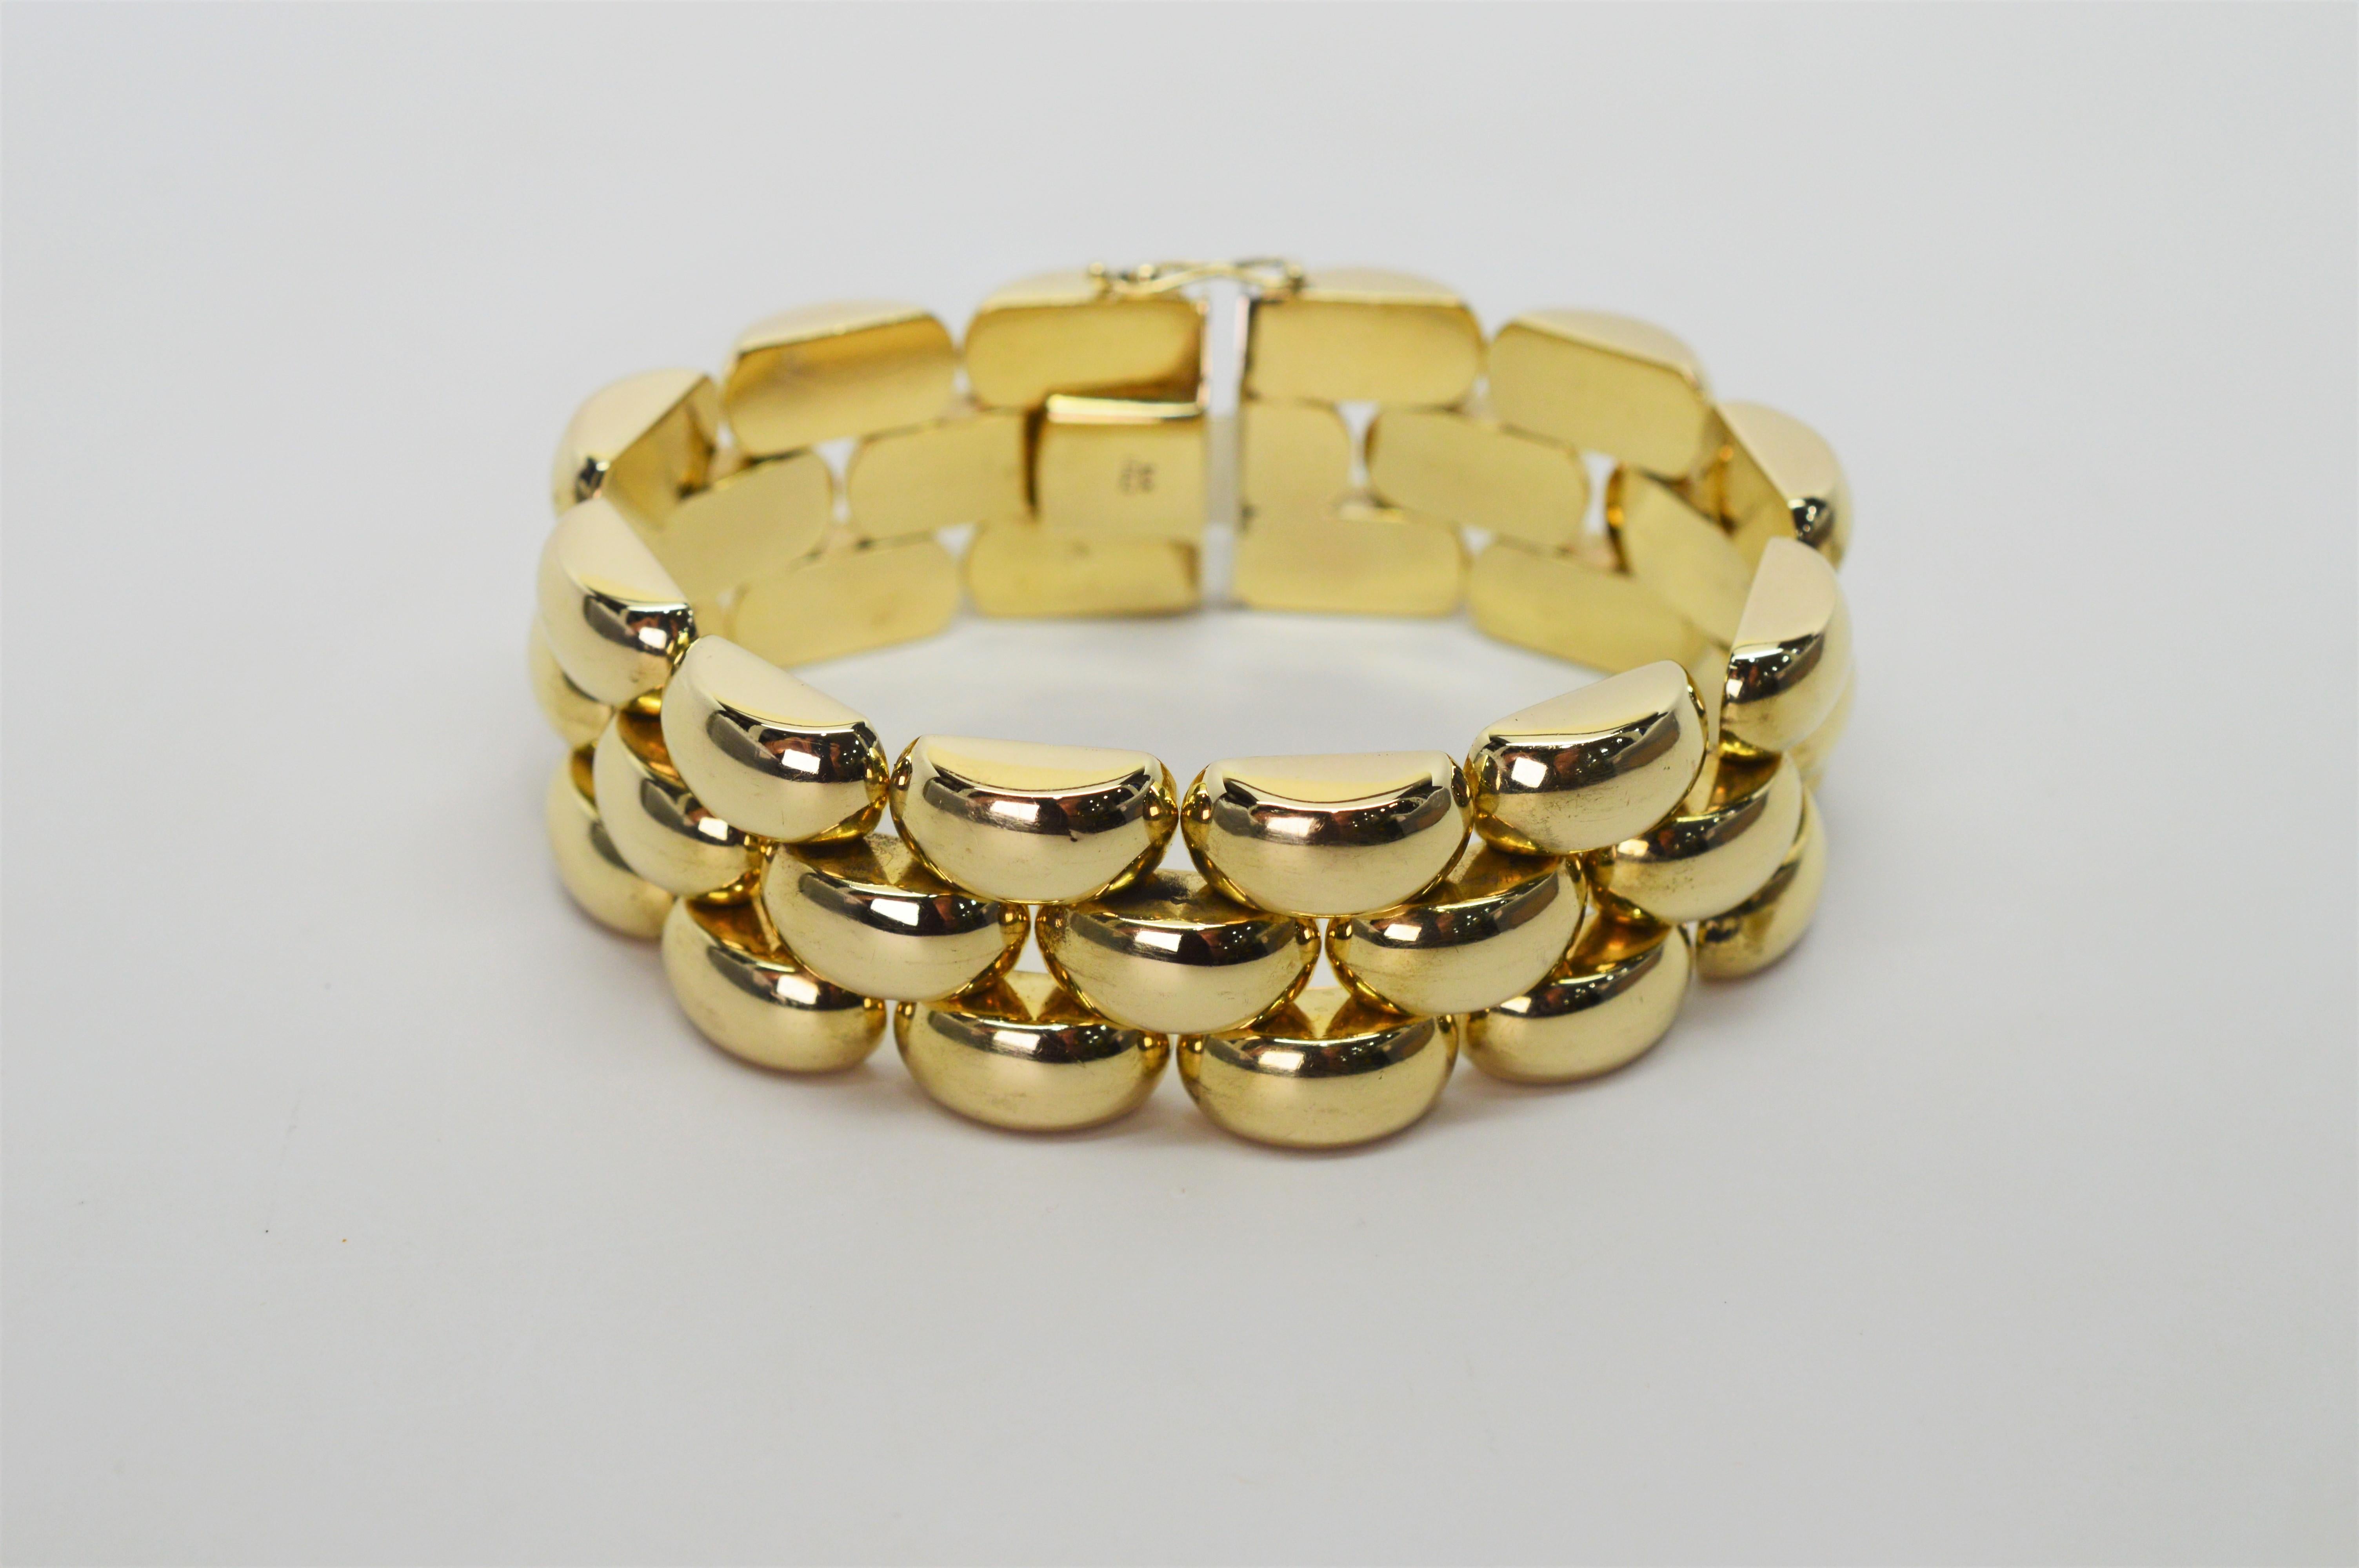 Retro 14 Karat Yellow Gold Bubble Link Bracelet In Excellent Condition For Sale In Mount Kisco, NY